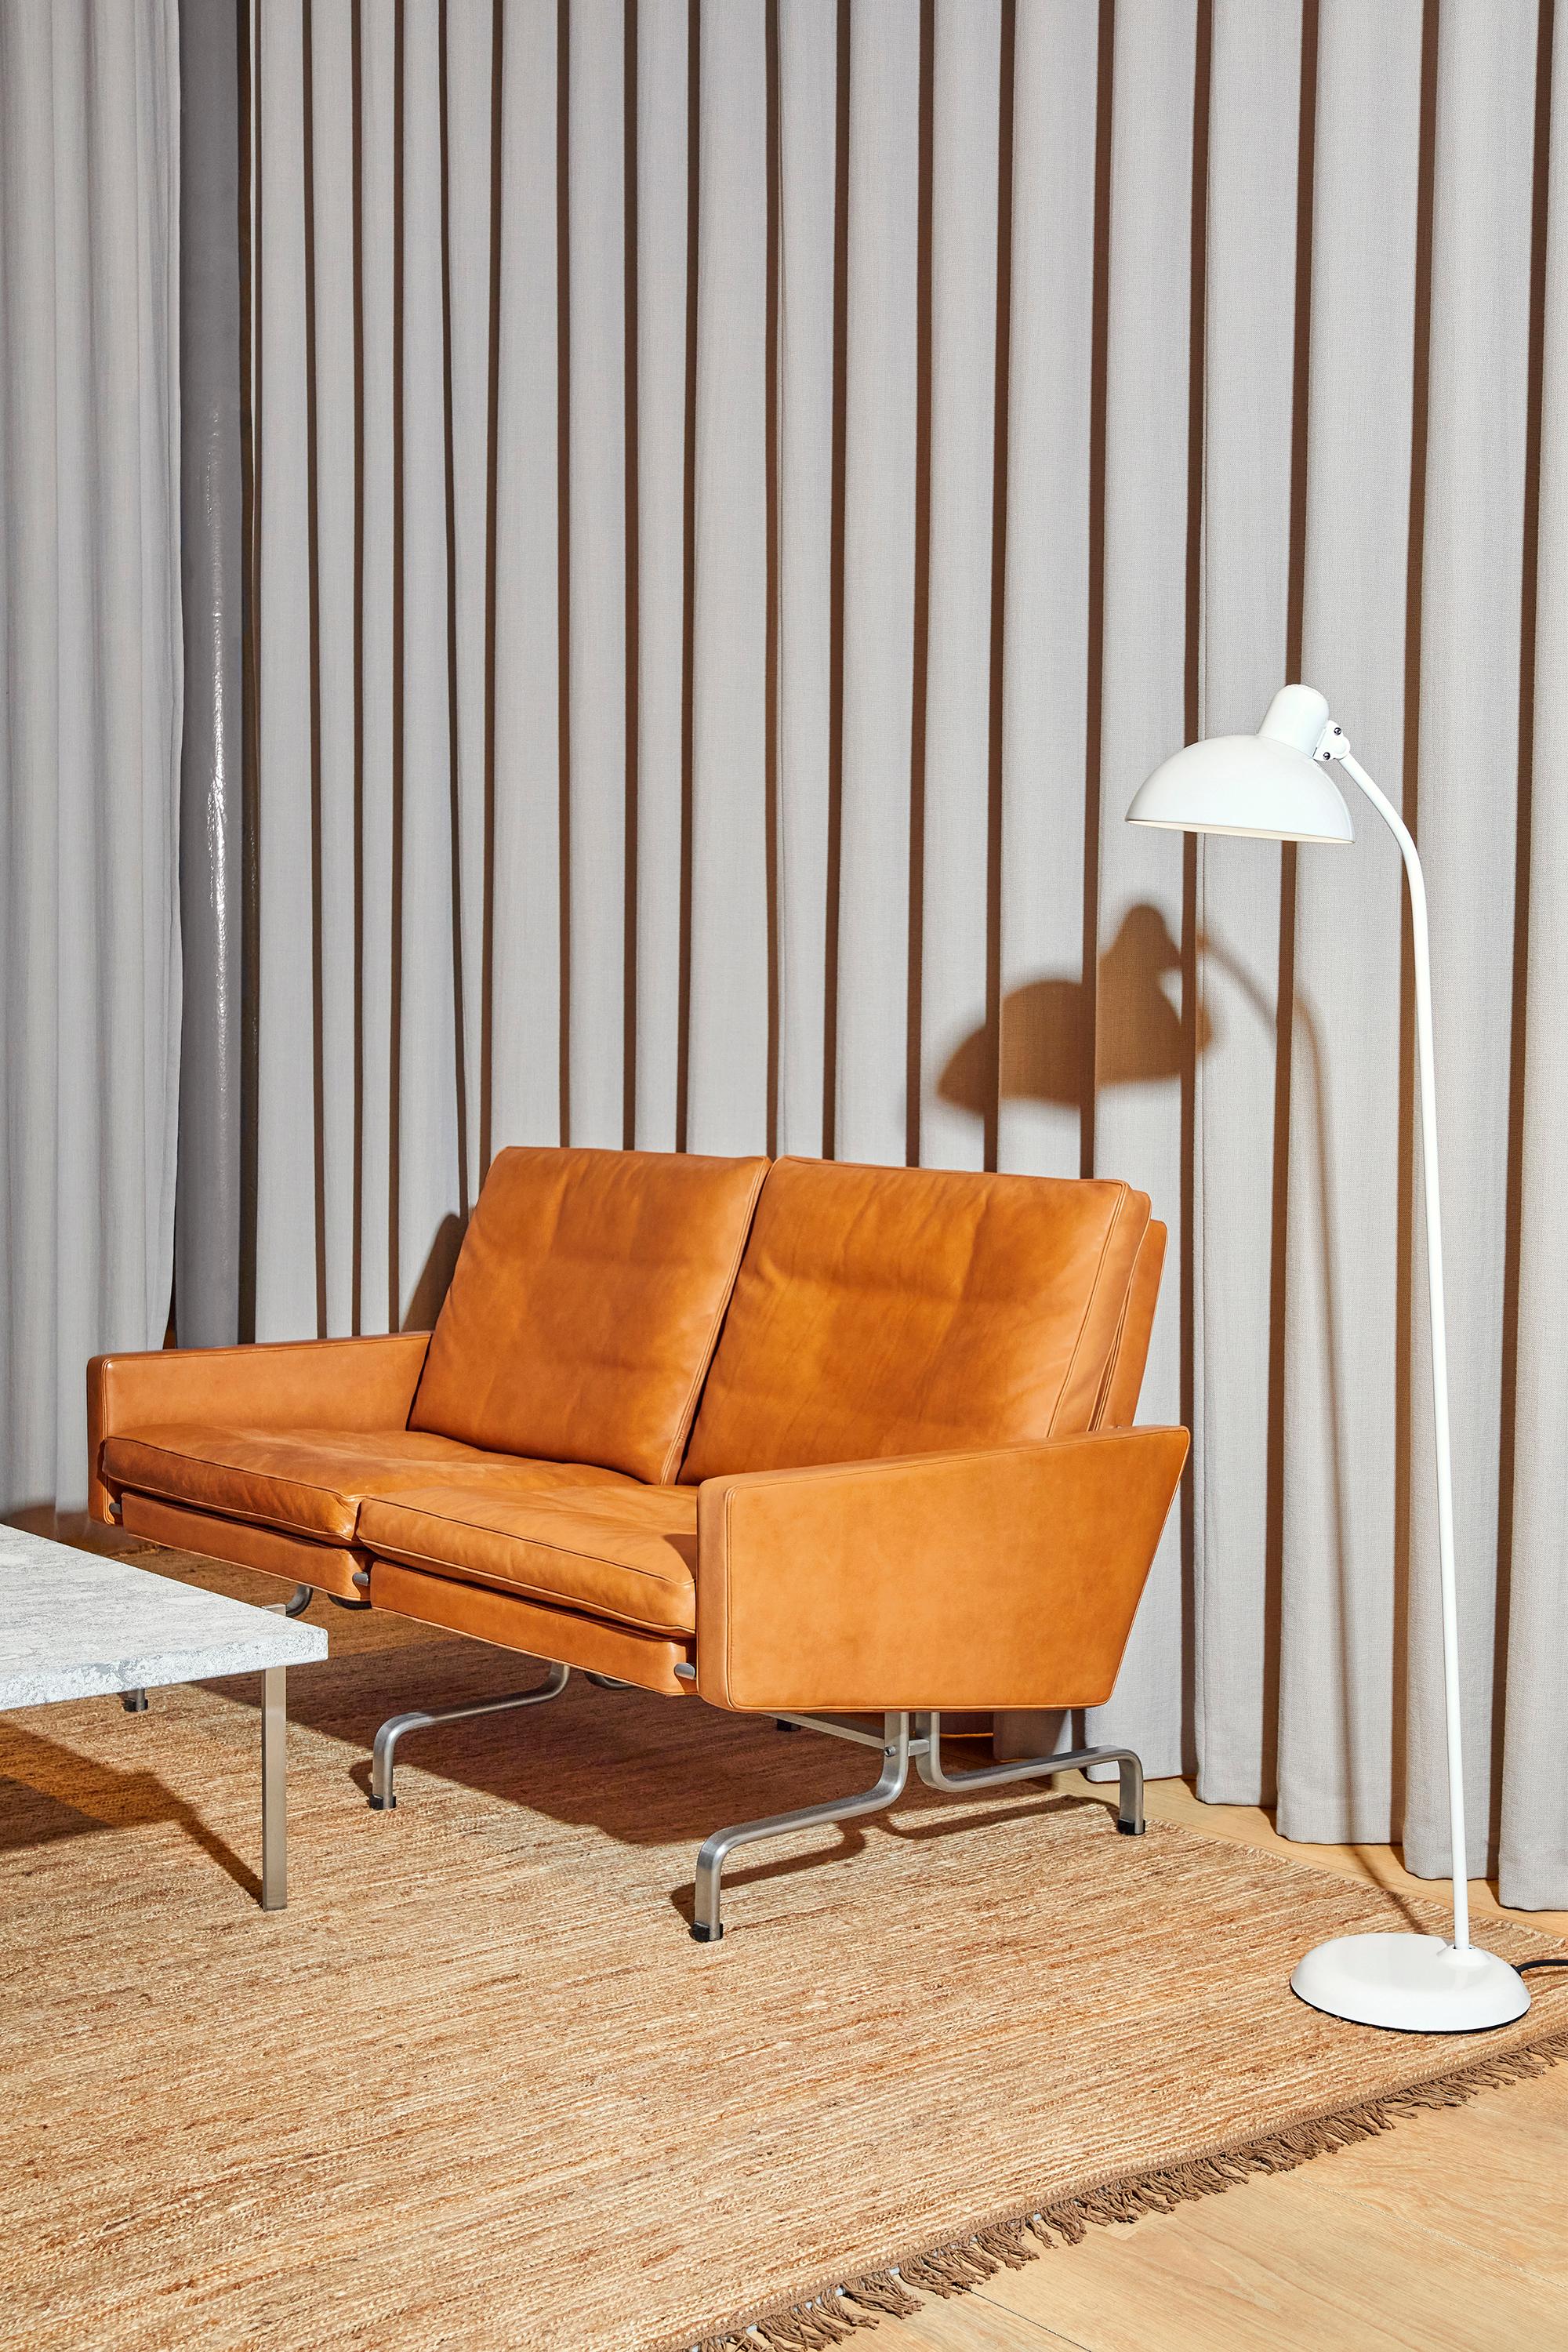 Christian Dell 'Kaiser Idell 6556-F' Floor Lamp for Fritz Hansen in Glossy White.

 Established in 1872, Fritz Hansen has become synonymous with legendary Danish design. Combining timeless craftsmanship with an emphasis on sustainability, the